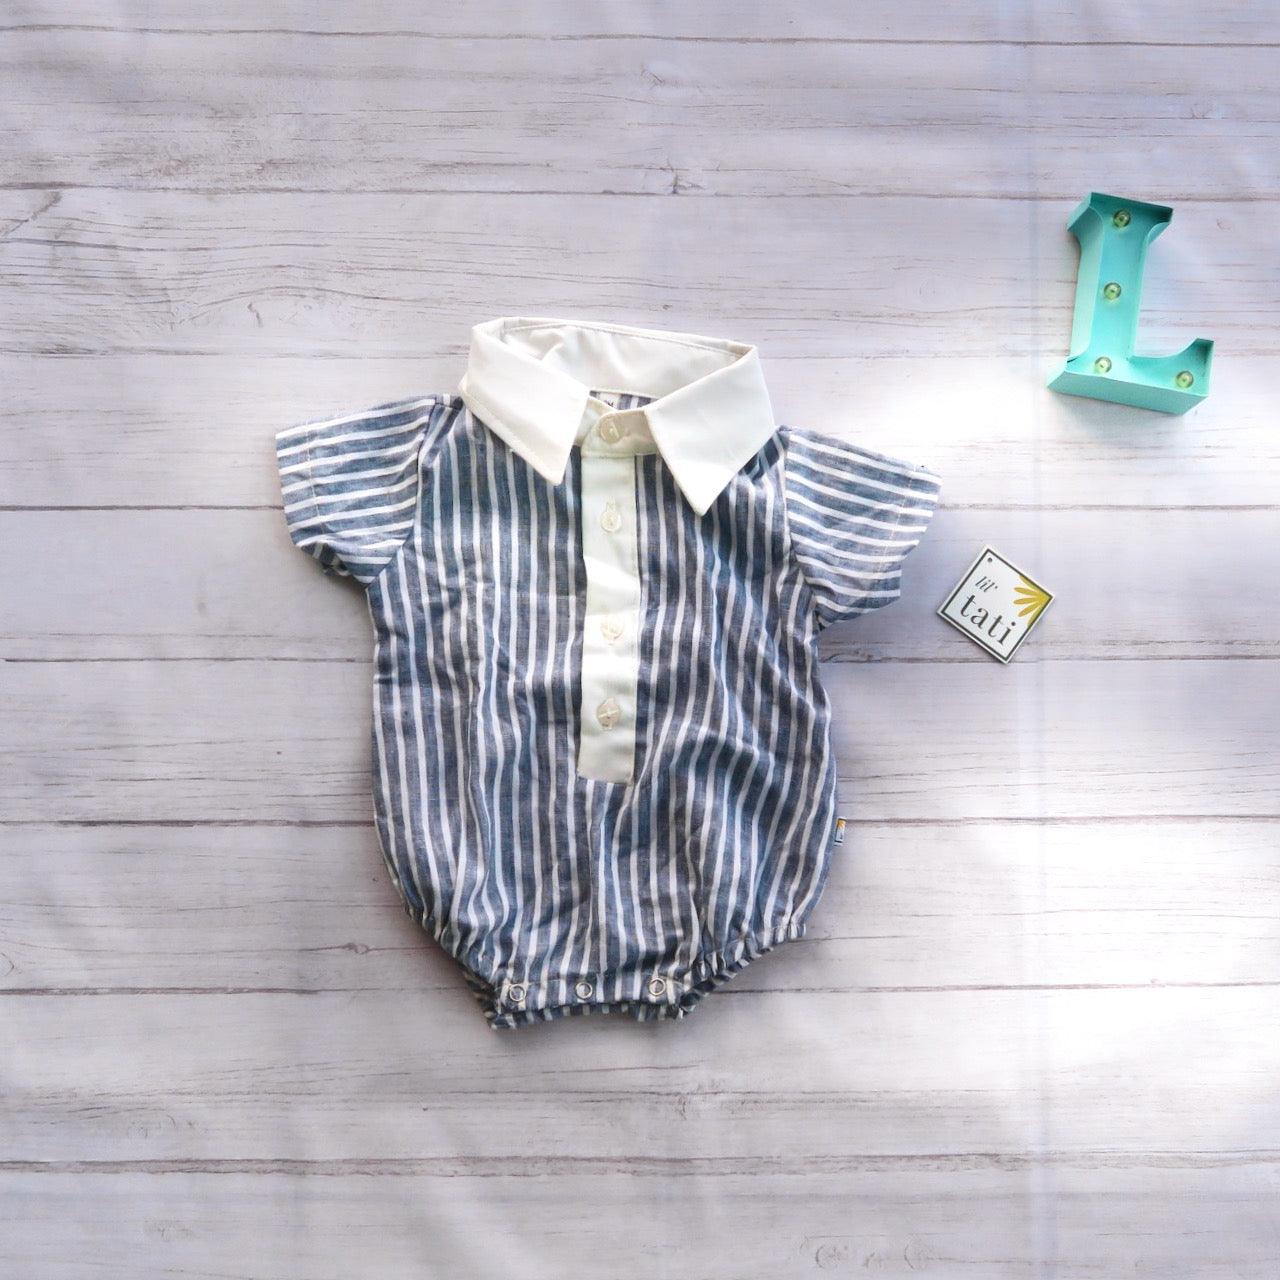 Pine Playsuit in Navy Stripes and White Linen - Lil' Tati